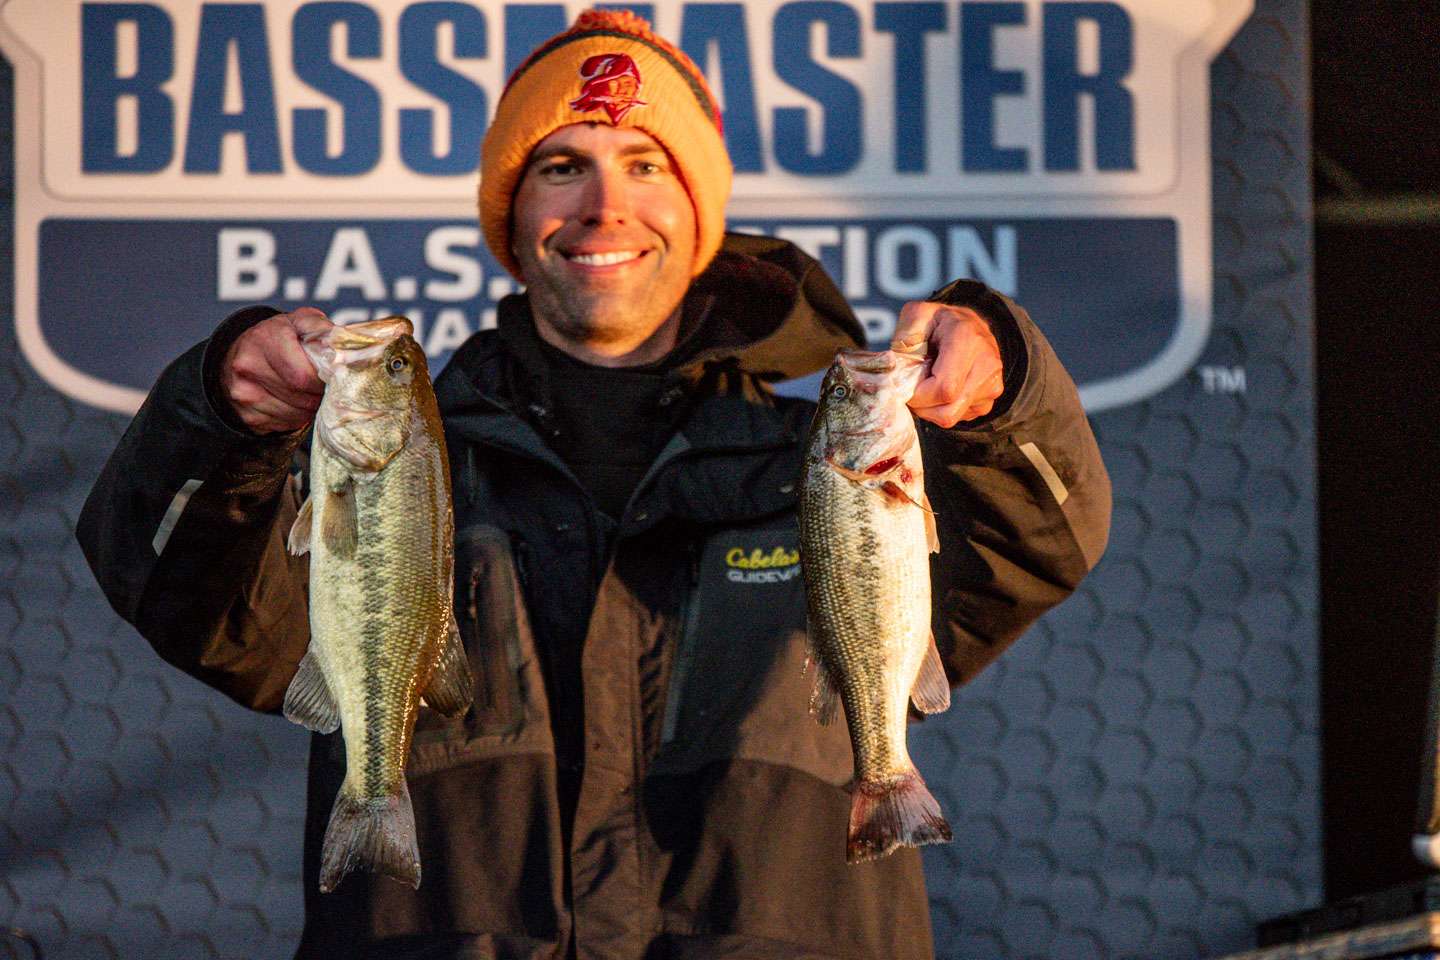 Michael Schelling, co-angler, 8th, 6-14